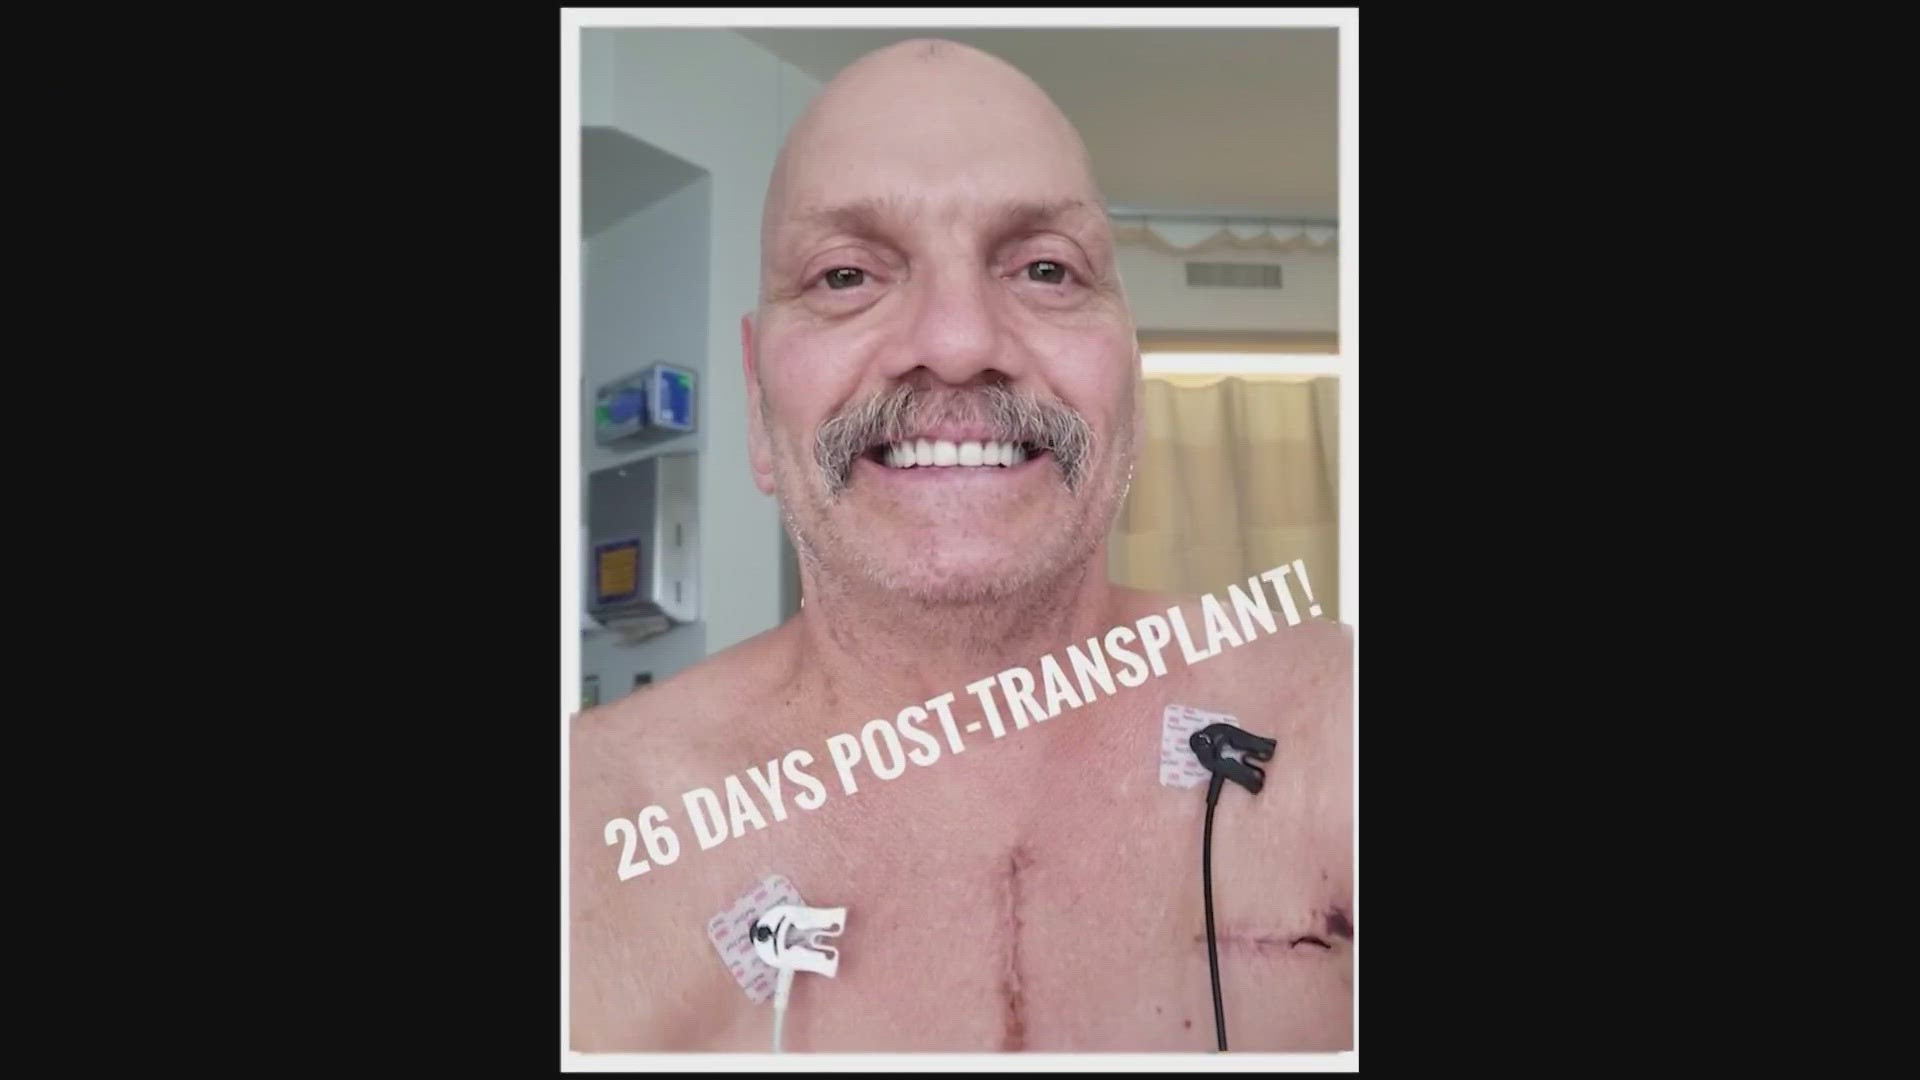 Patrick Holland's flight to get a new heart was canceled during December's ice storm grounding flights. Three months later, he has a new heart.